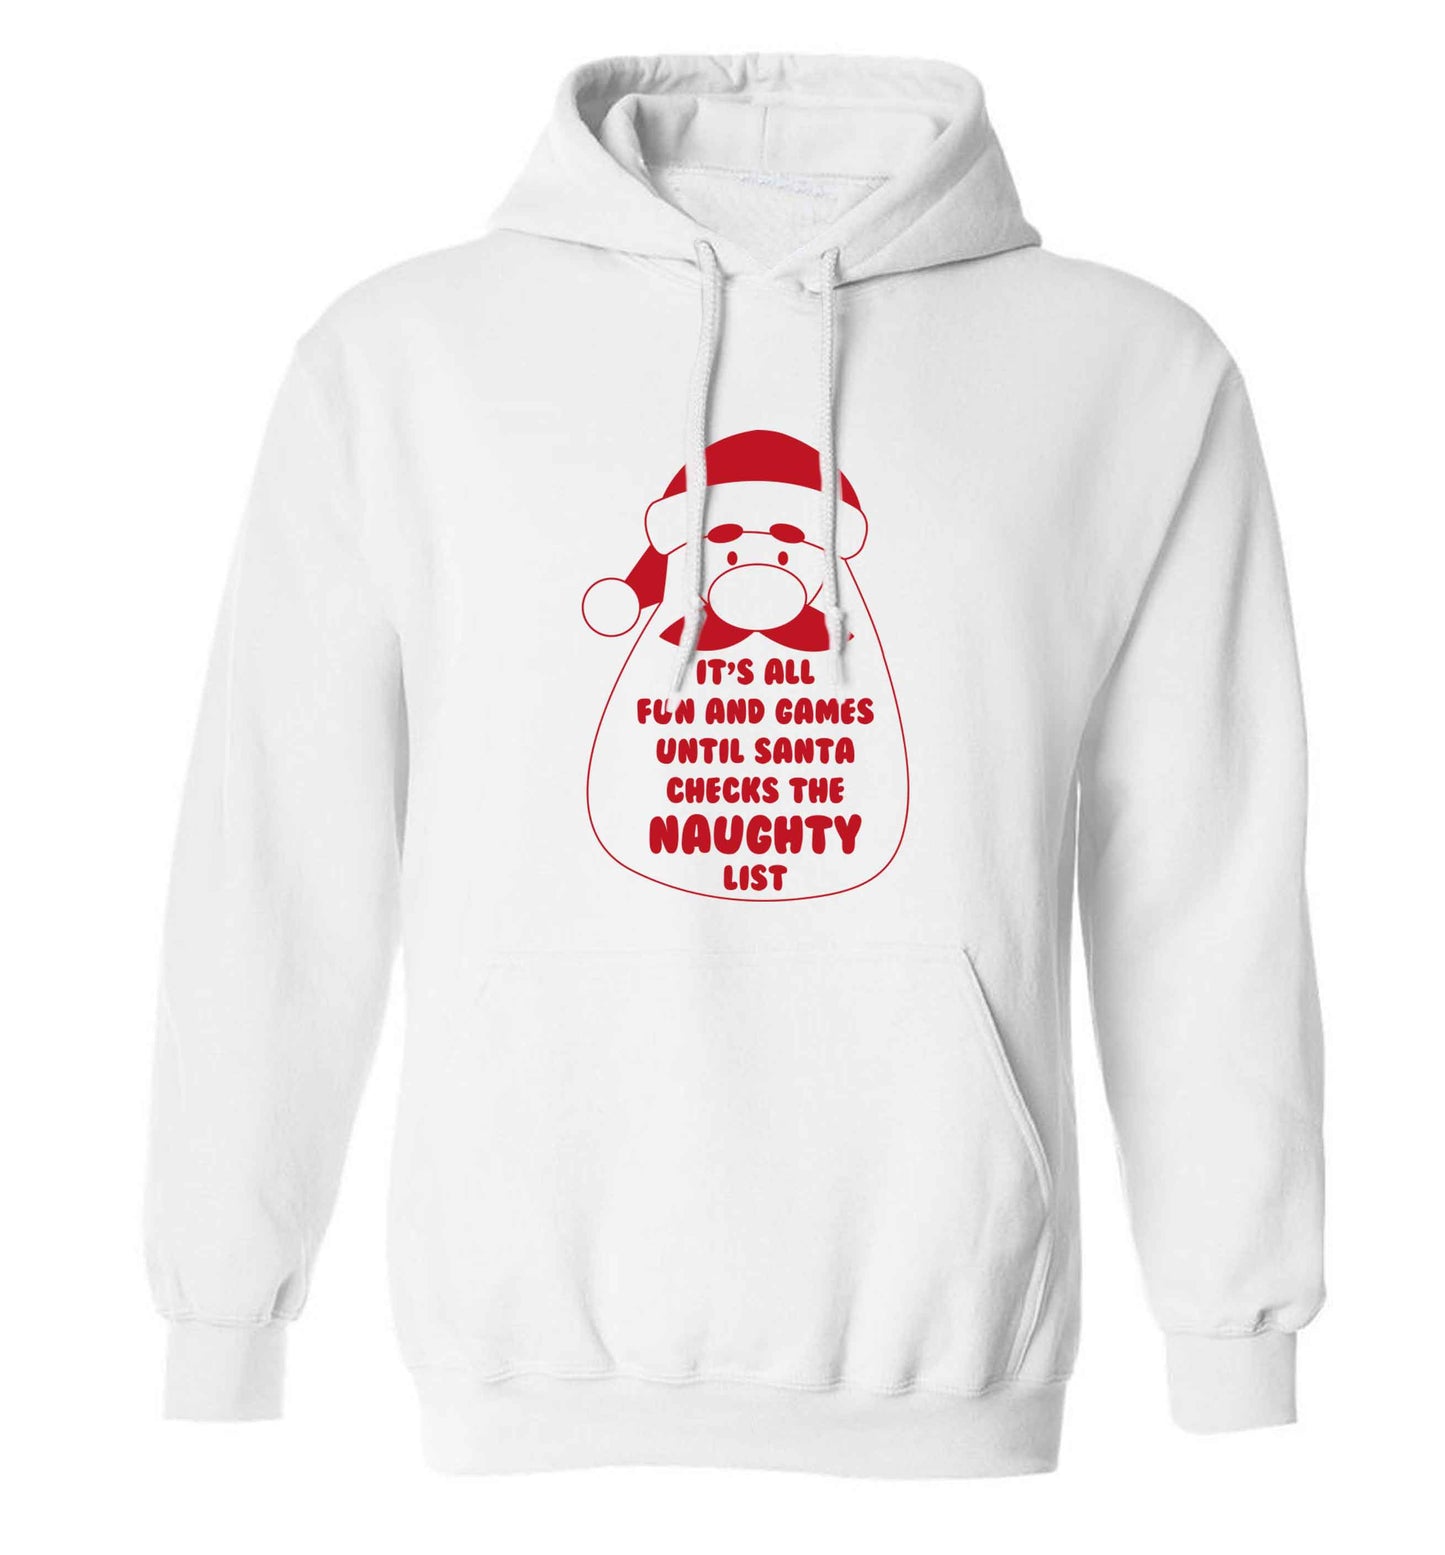 It's all fun and games until Santa checks the naughty list adults unisex white hoodie 2XL